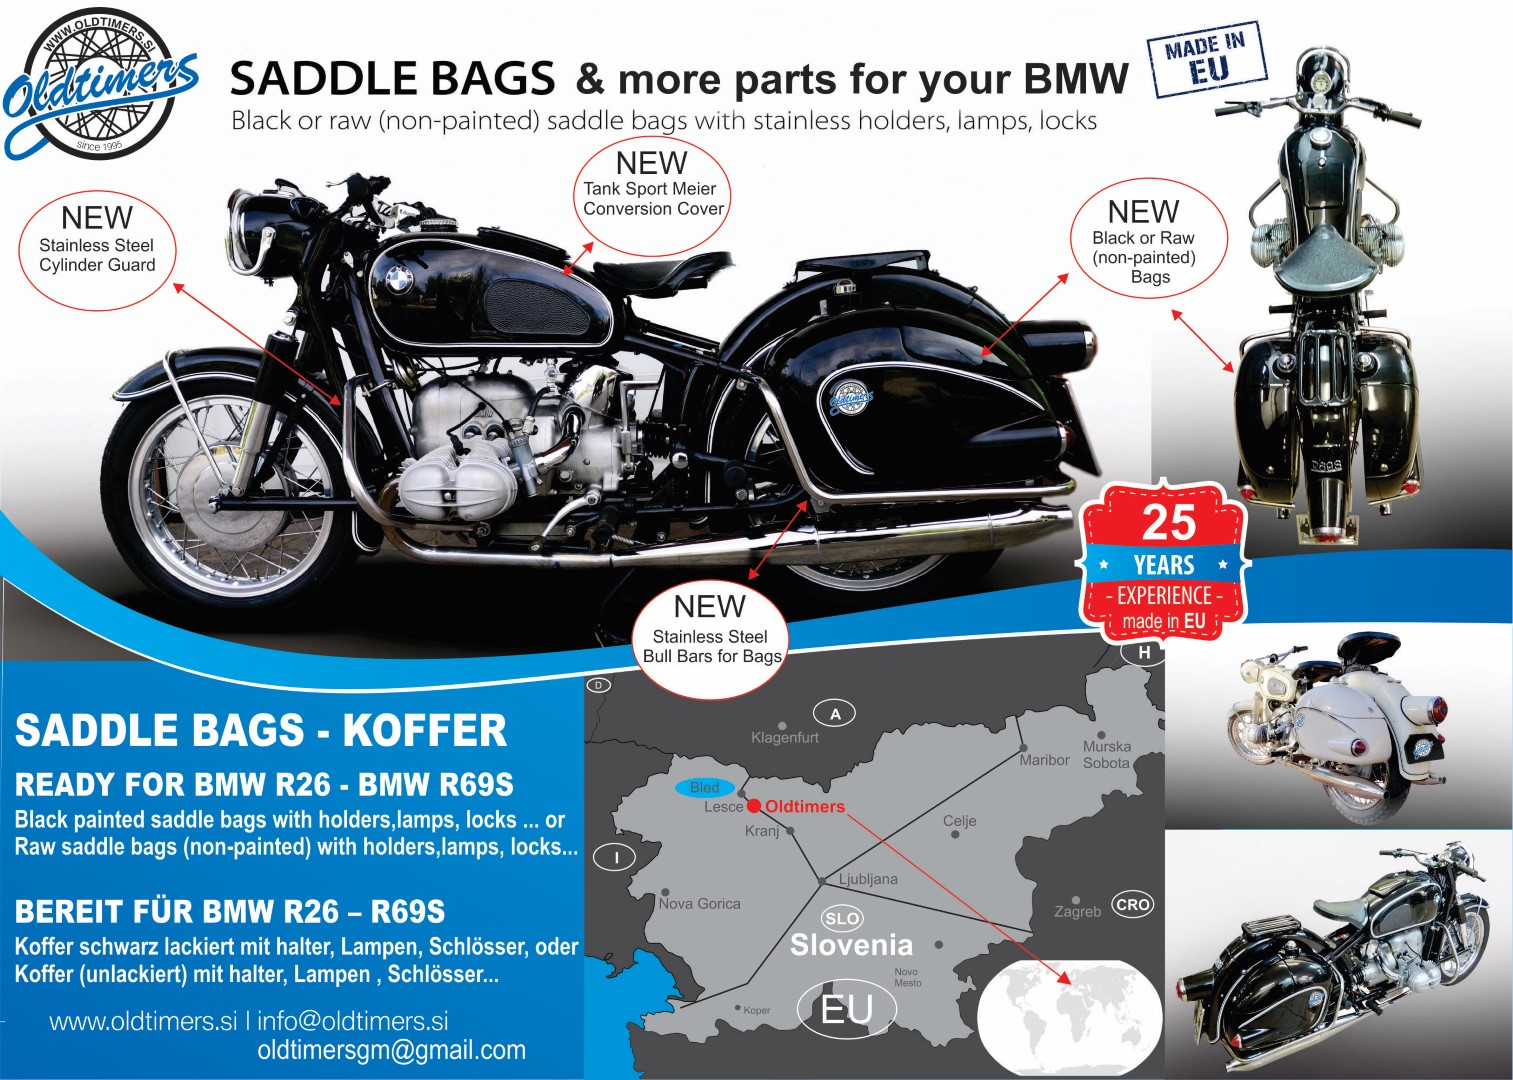 Bags Flyer 12 2019 Large